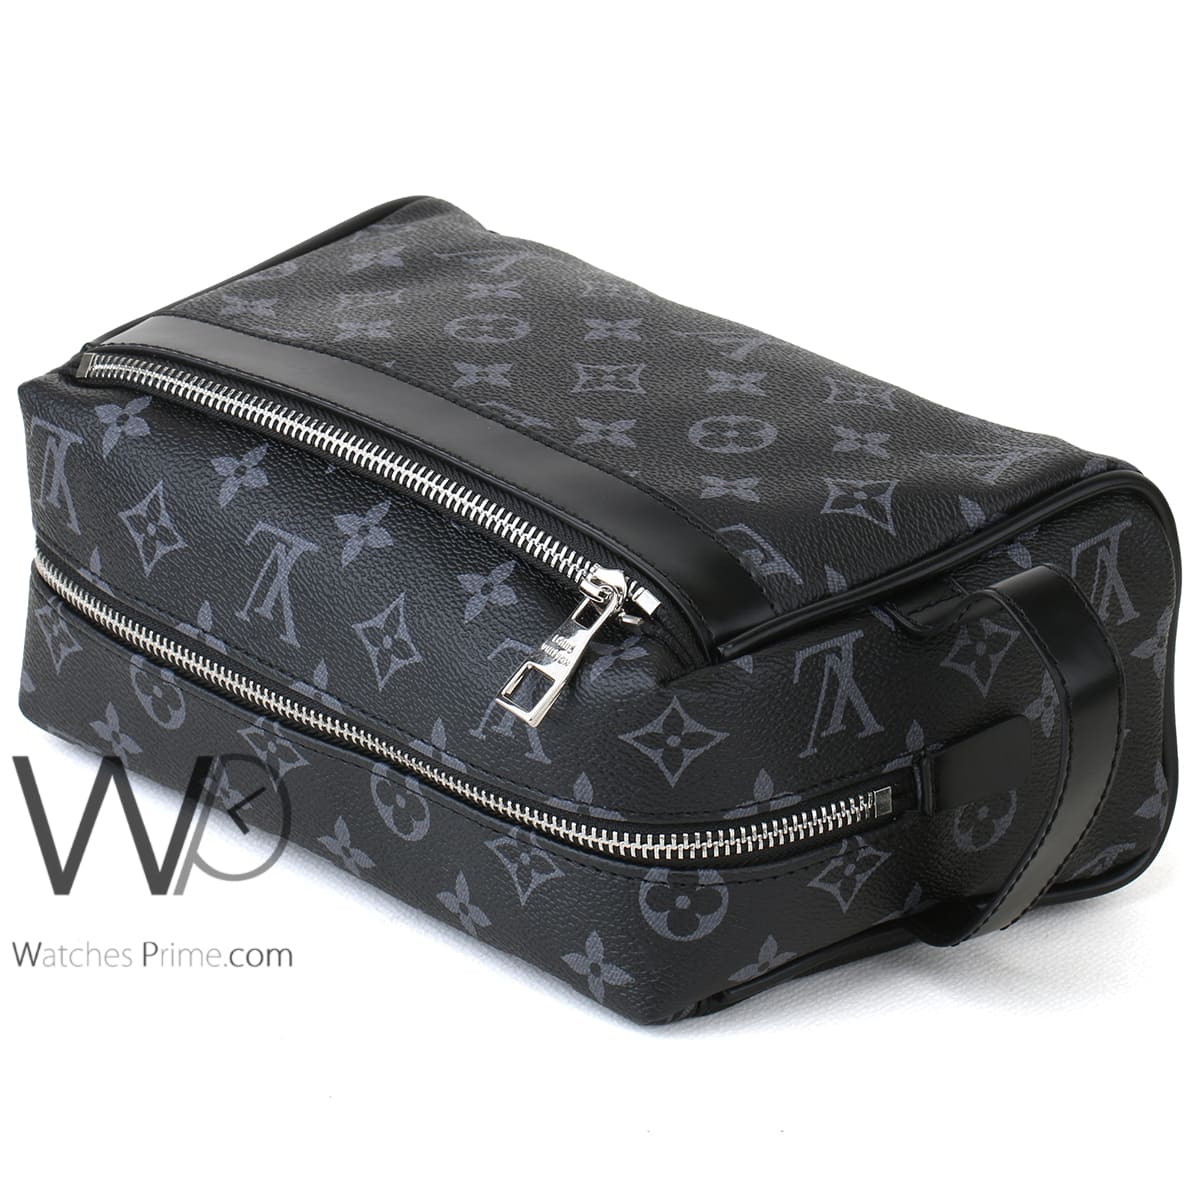 Trend to try Crossbody bags that are as cool as LV x Supremes   Lifestyle Asia Singapore